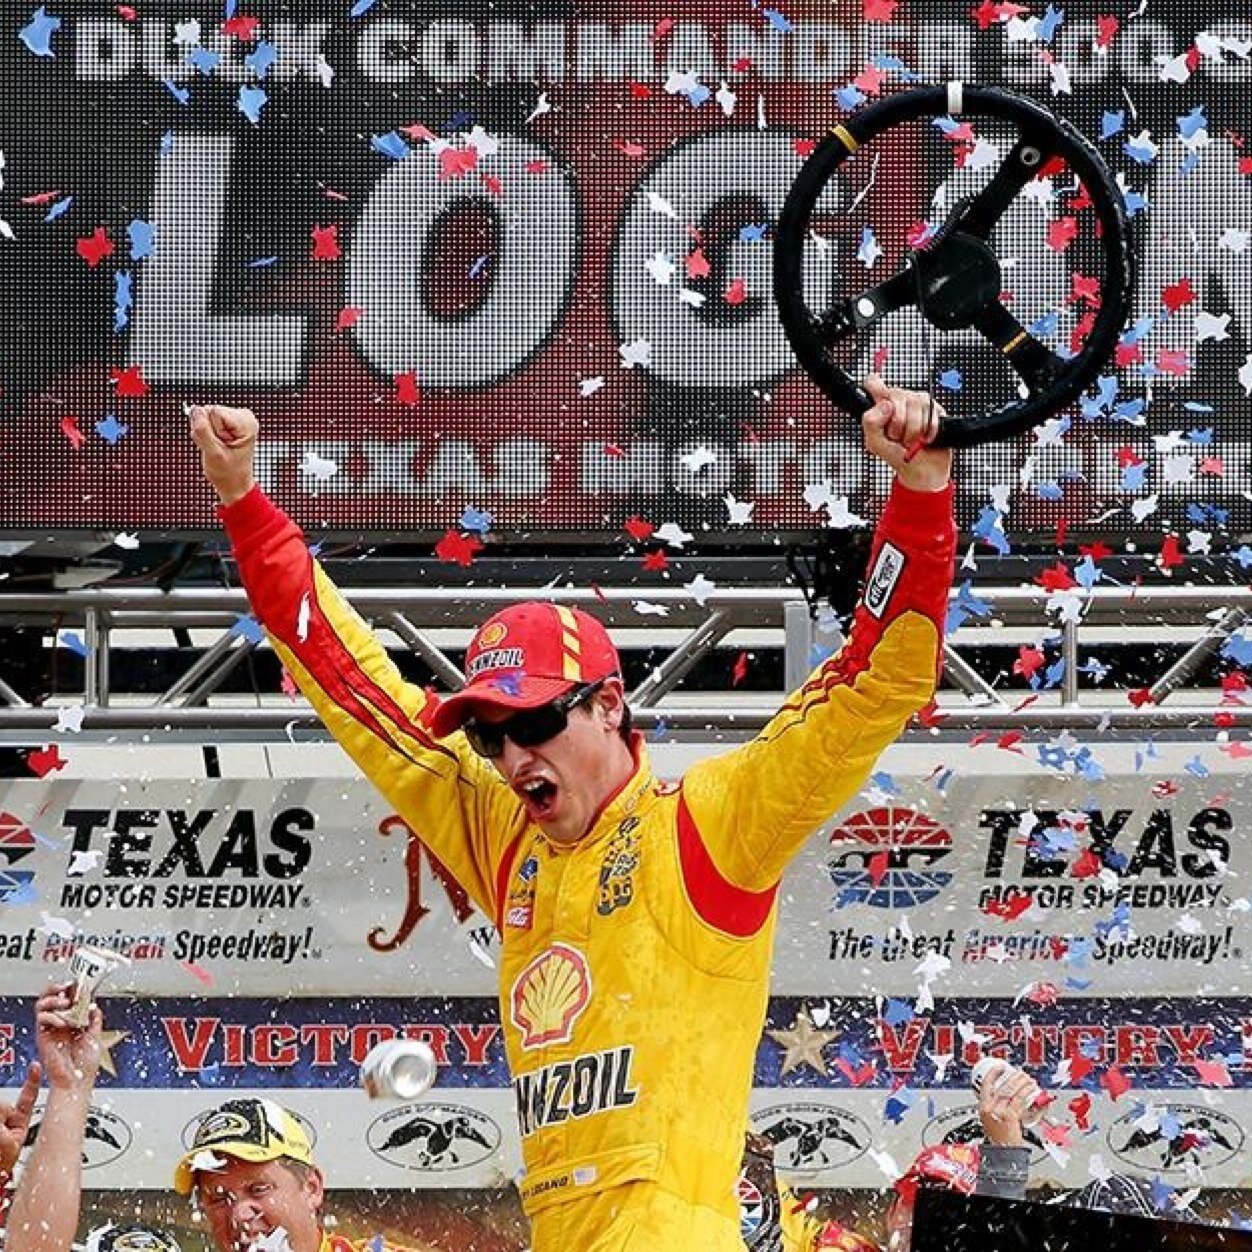 Everything @JoeyLogano! Twitter account for the joey-logano tumblr blog! #NFB ***NOT ACTUALLY JOEY LOGANO. I DID MEET HIM ONCE THOUGH*** #TeamJL #TeamLogano